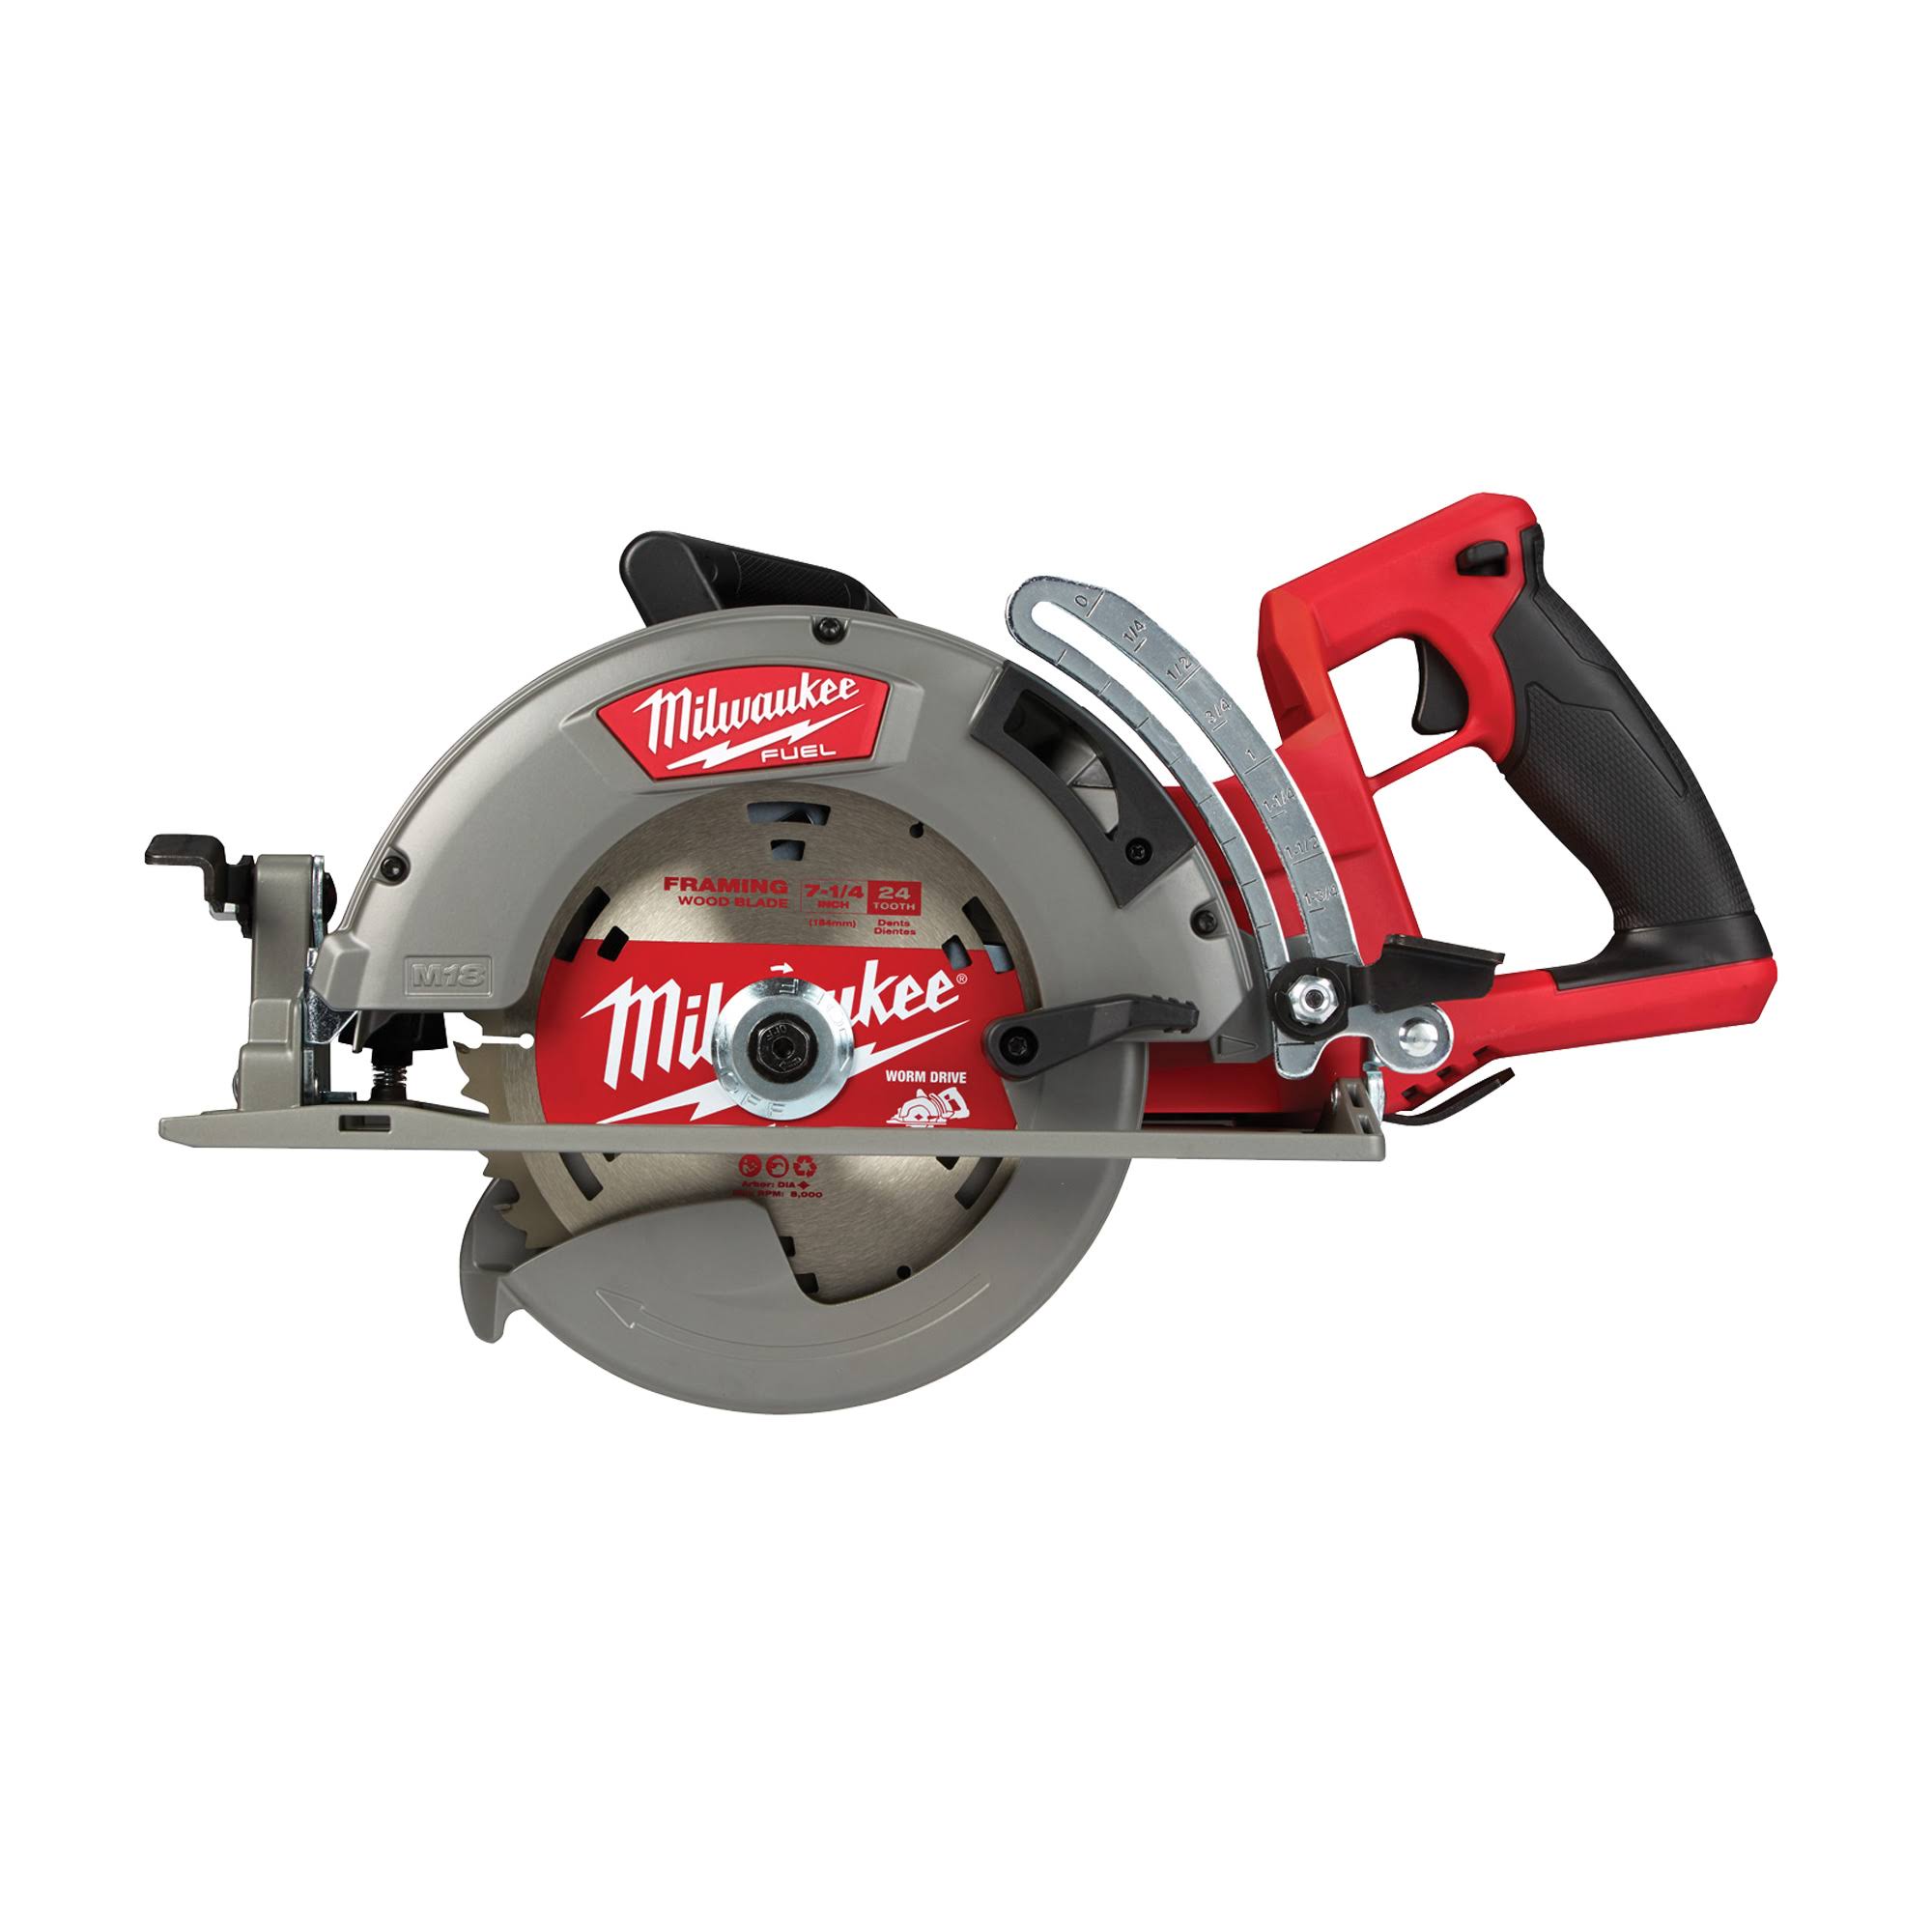 Milwaukee 2830-20 M18 FUEL 7-1/4" Rear Handle Circular Saw (Tool Only)